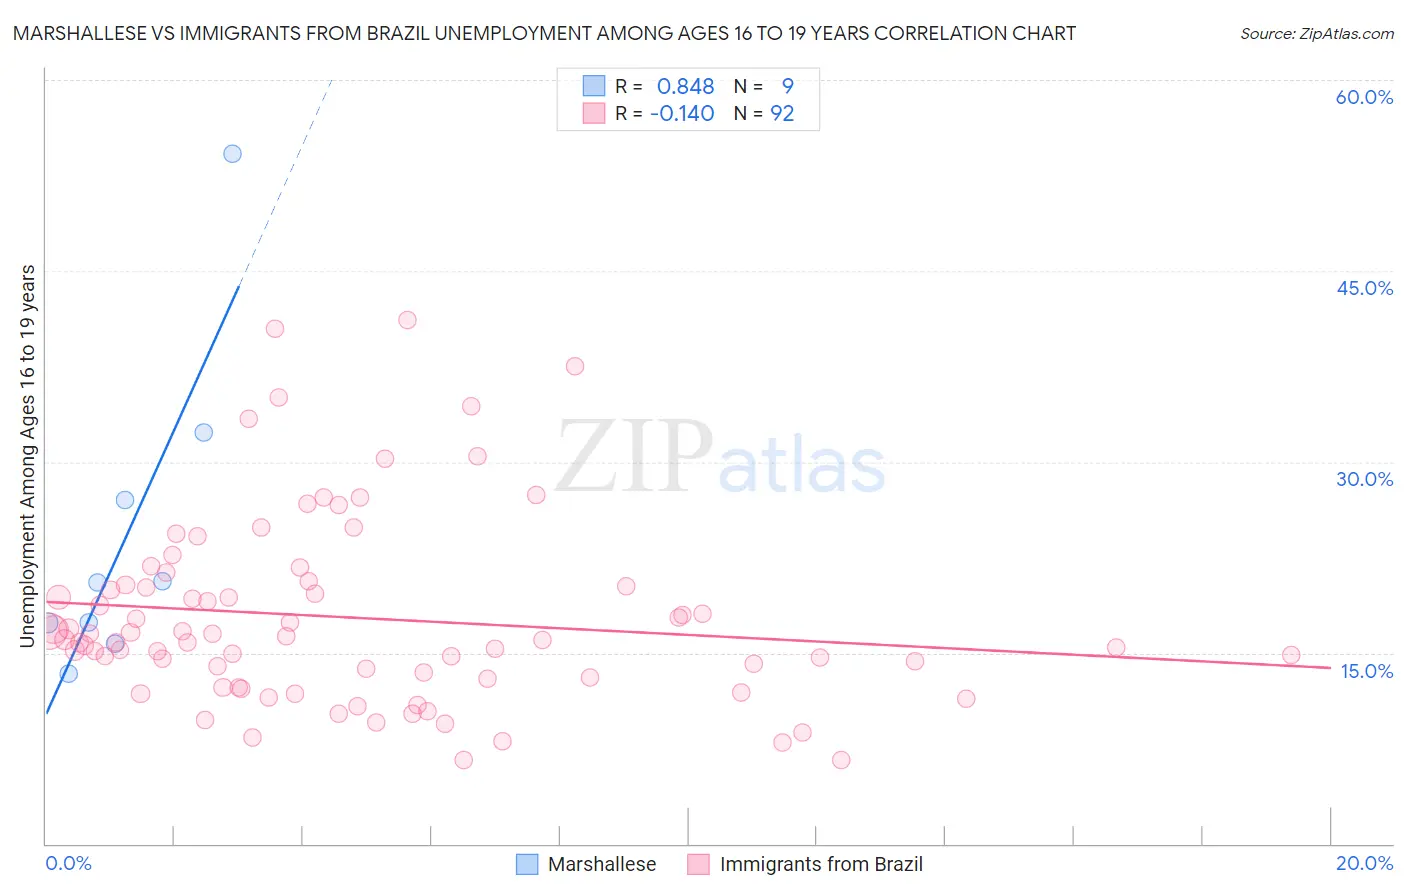 Marshallese vs Immigrants from Brazil Unemployment Among Ages 16 to 19 years